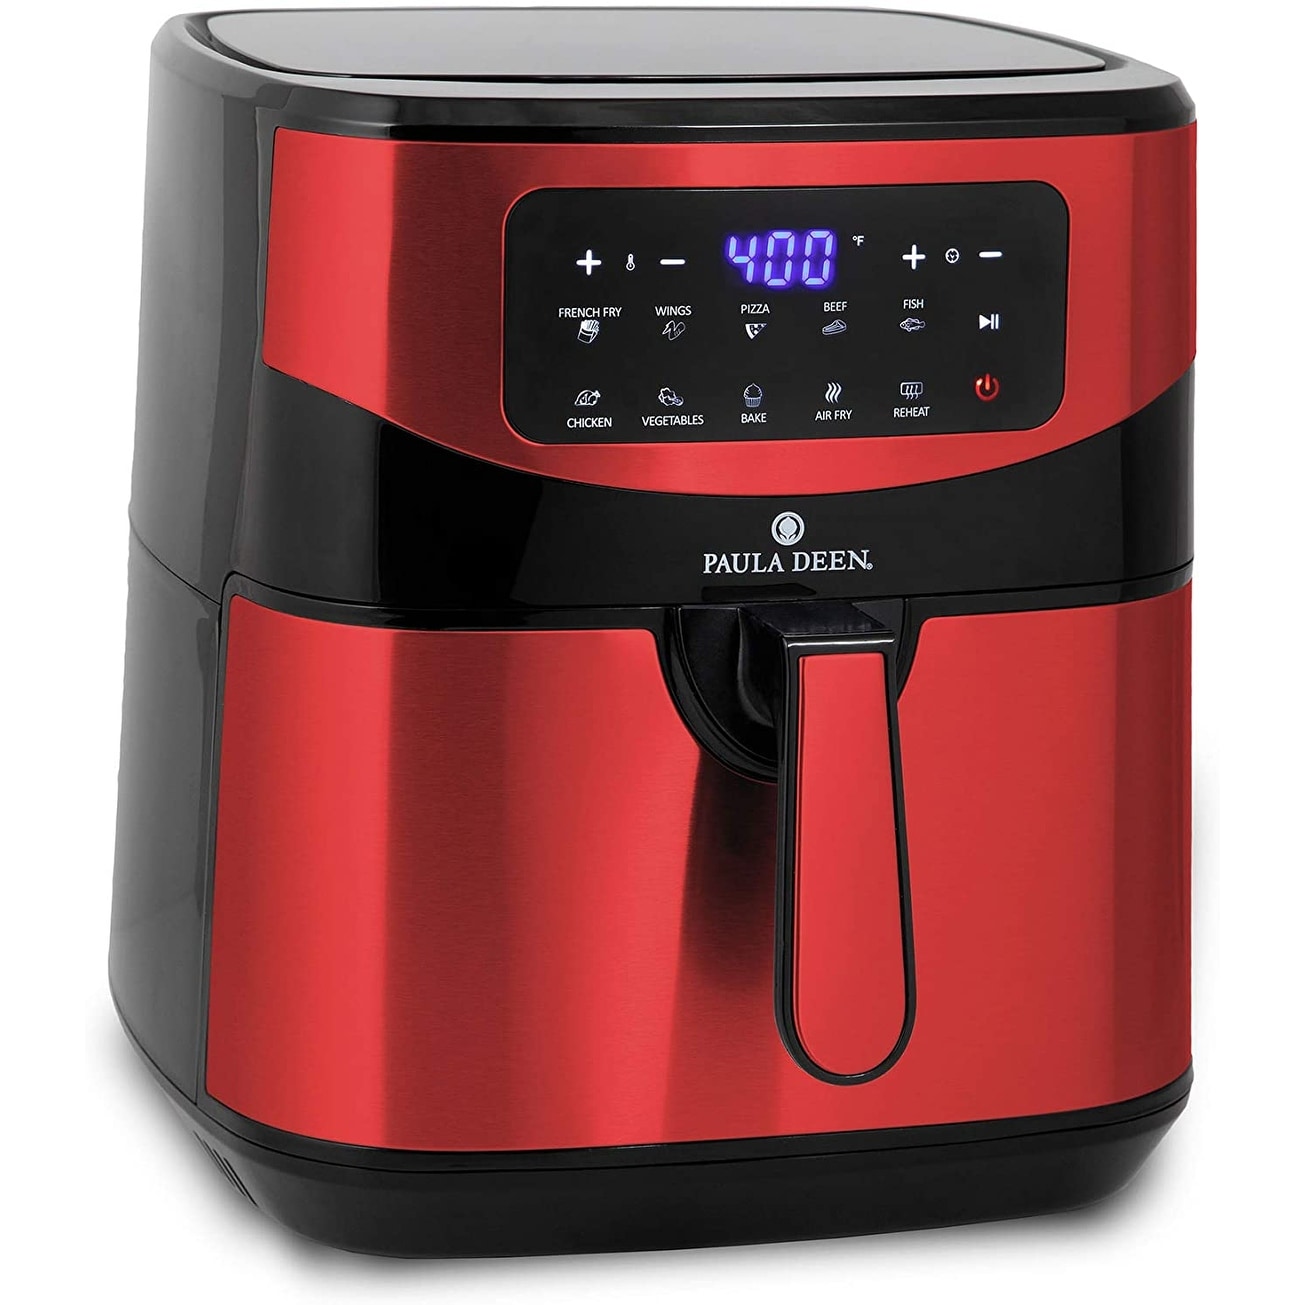 Paula Deen PDKDF579RR-RB Stainless Steel 10qt Air Fryer, Red Stainless - Certified Refurbished